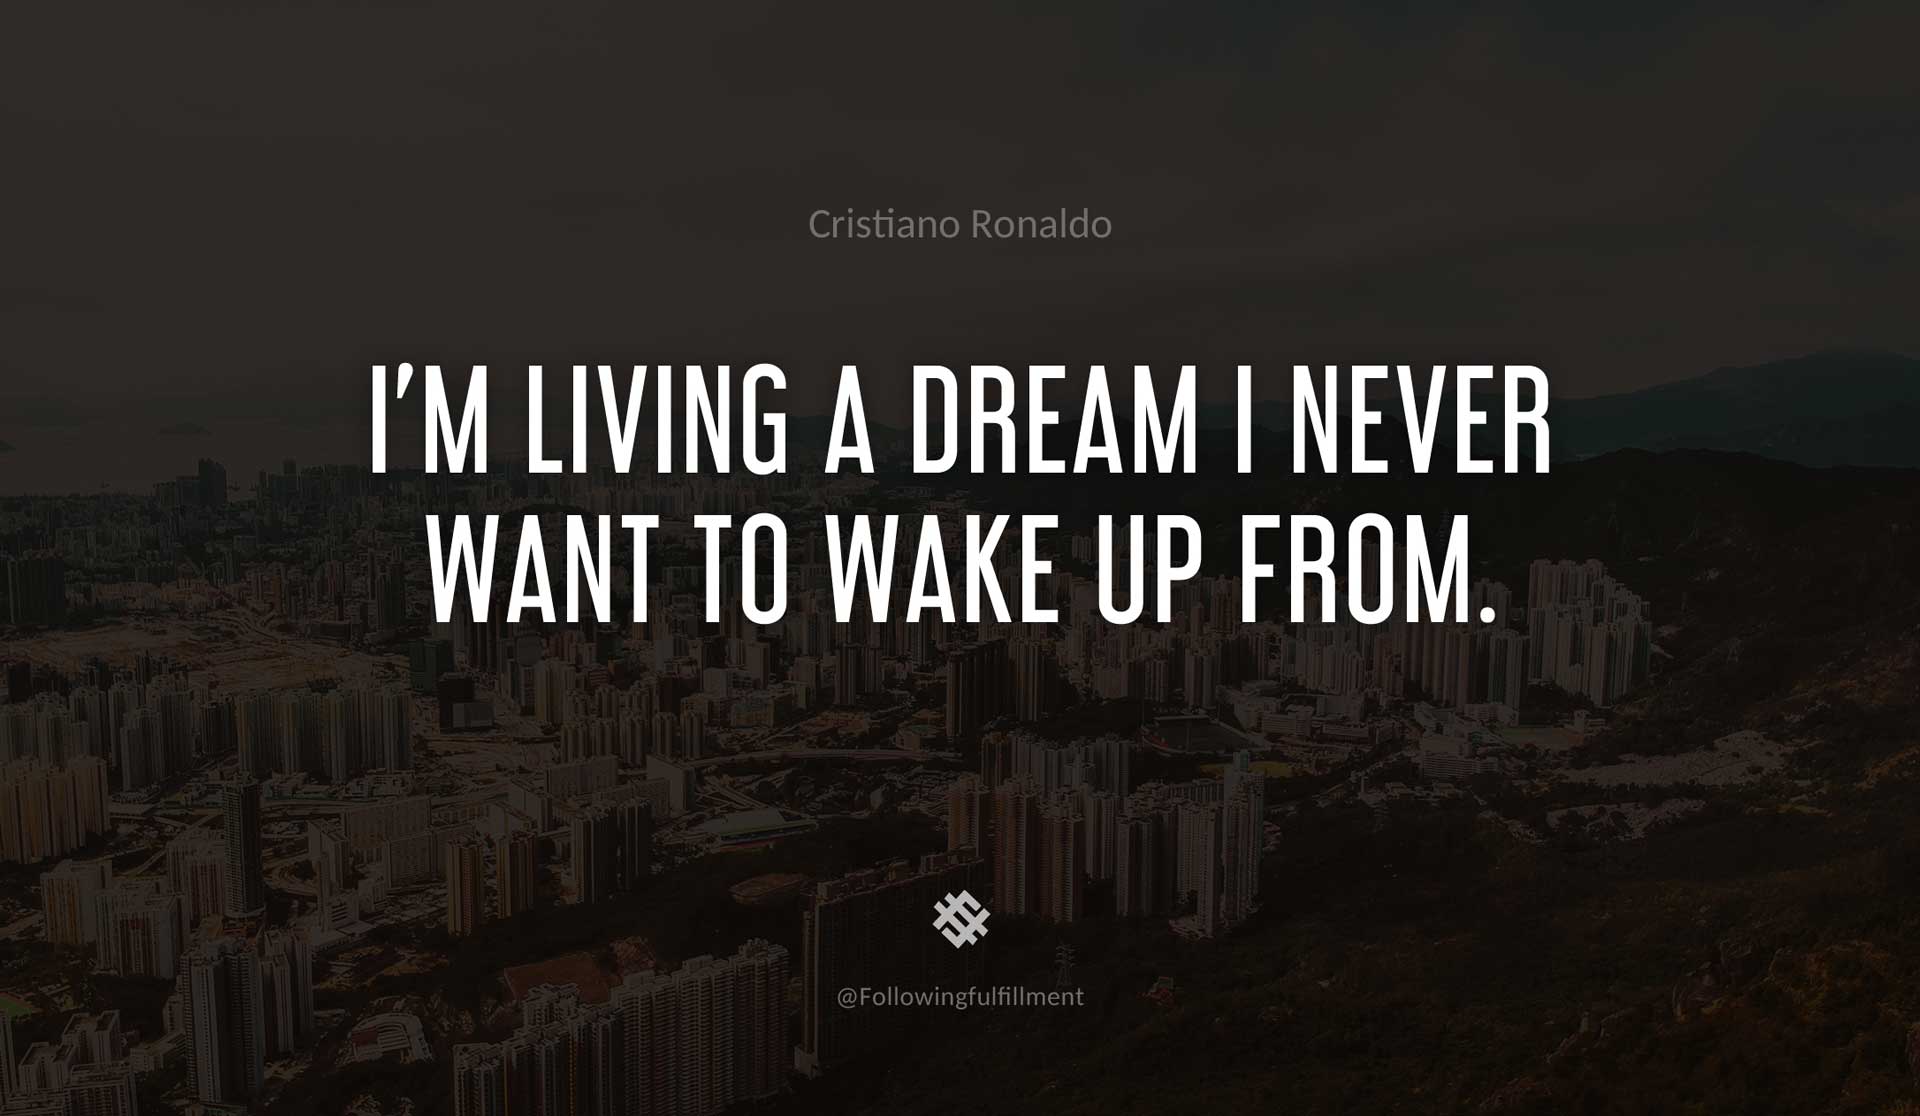 I'm-living-a-dream-I-never-want-to-wake-up-from.-CRISTIANO-RONALDO-Quote.jpg